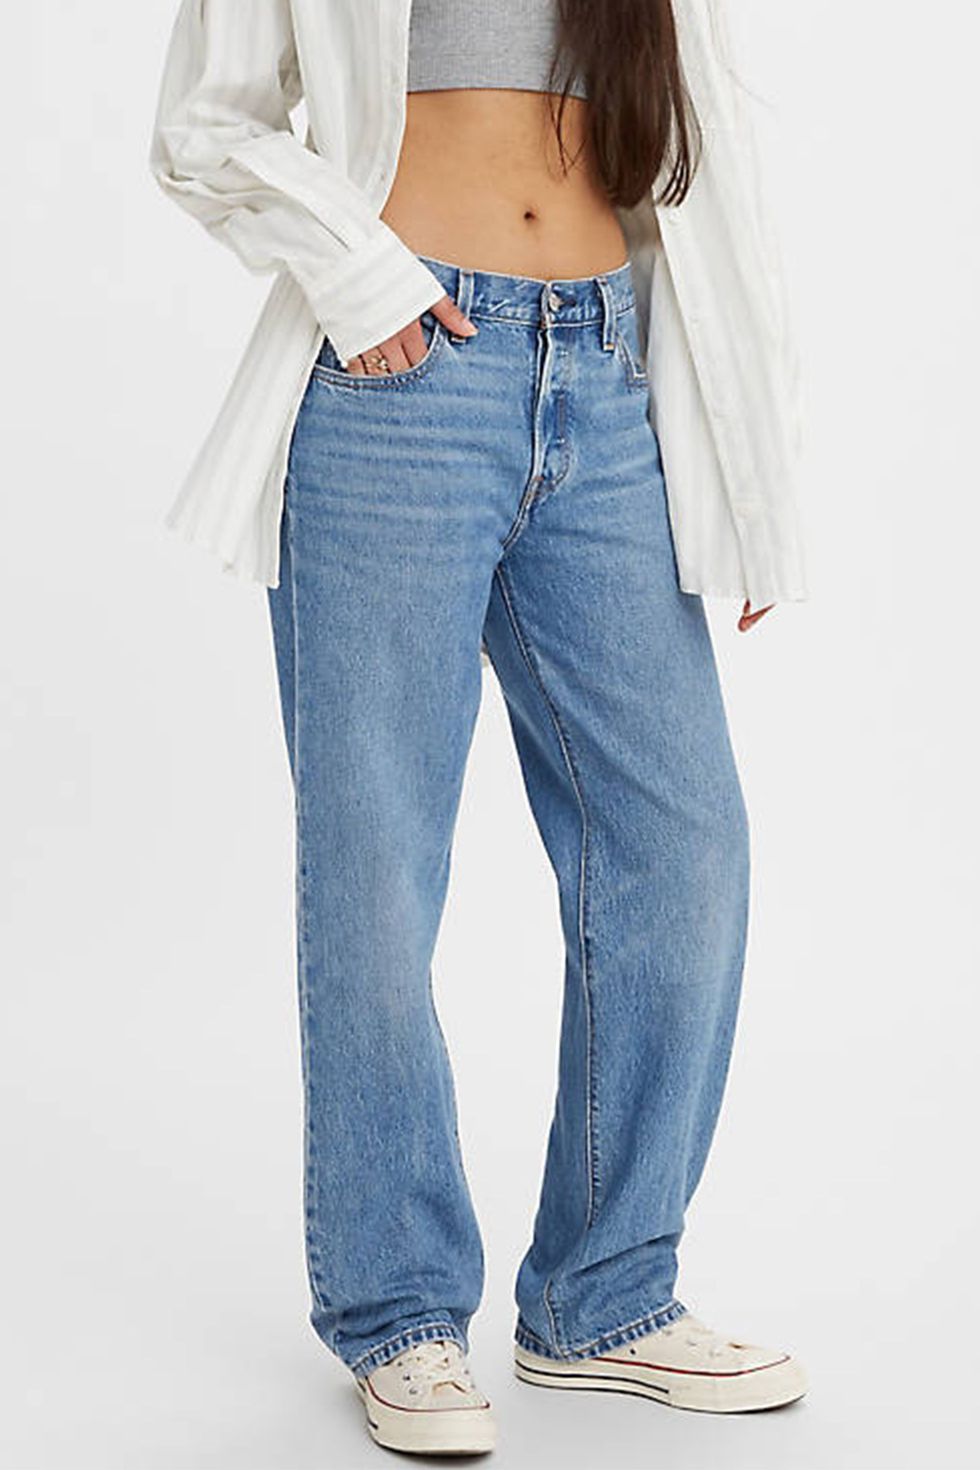 Levi's High Waisted Mom Jean Shorts In a Pinch Medium Stone Wash